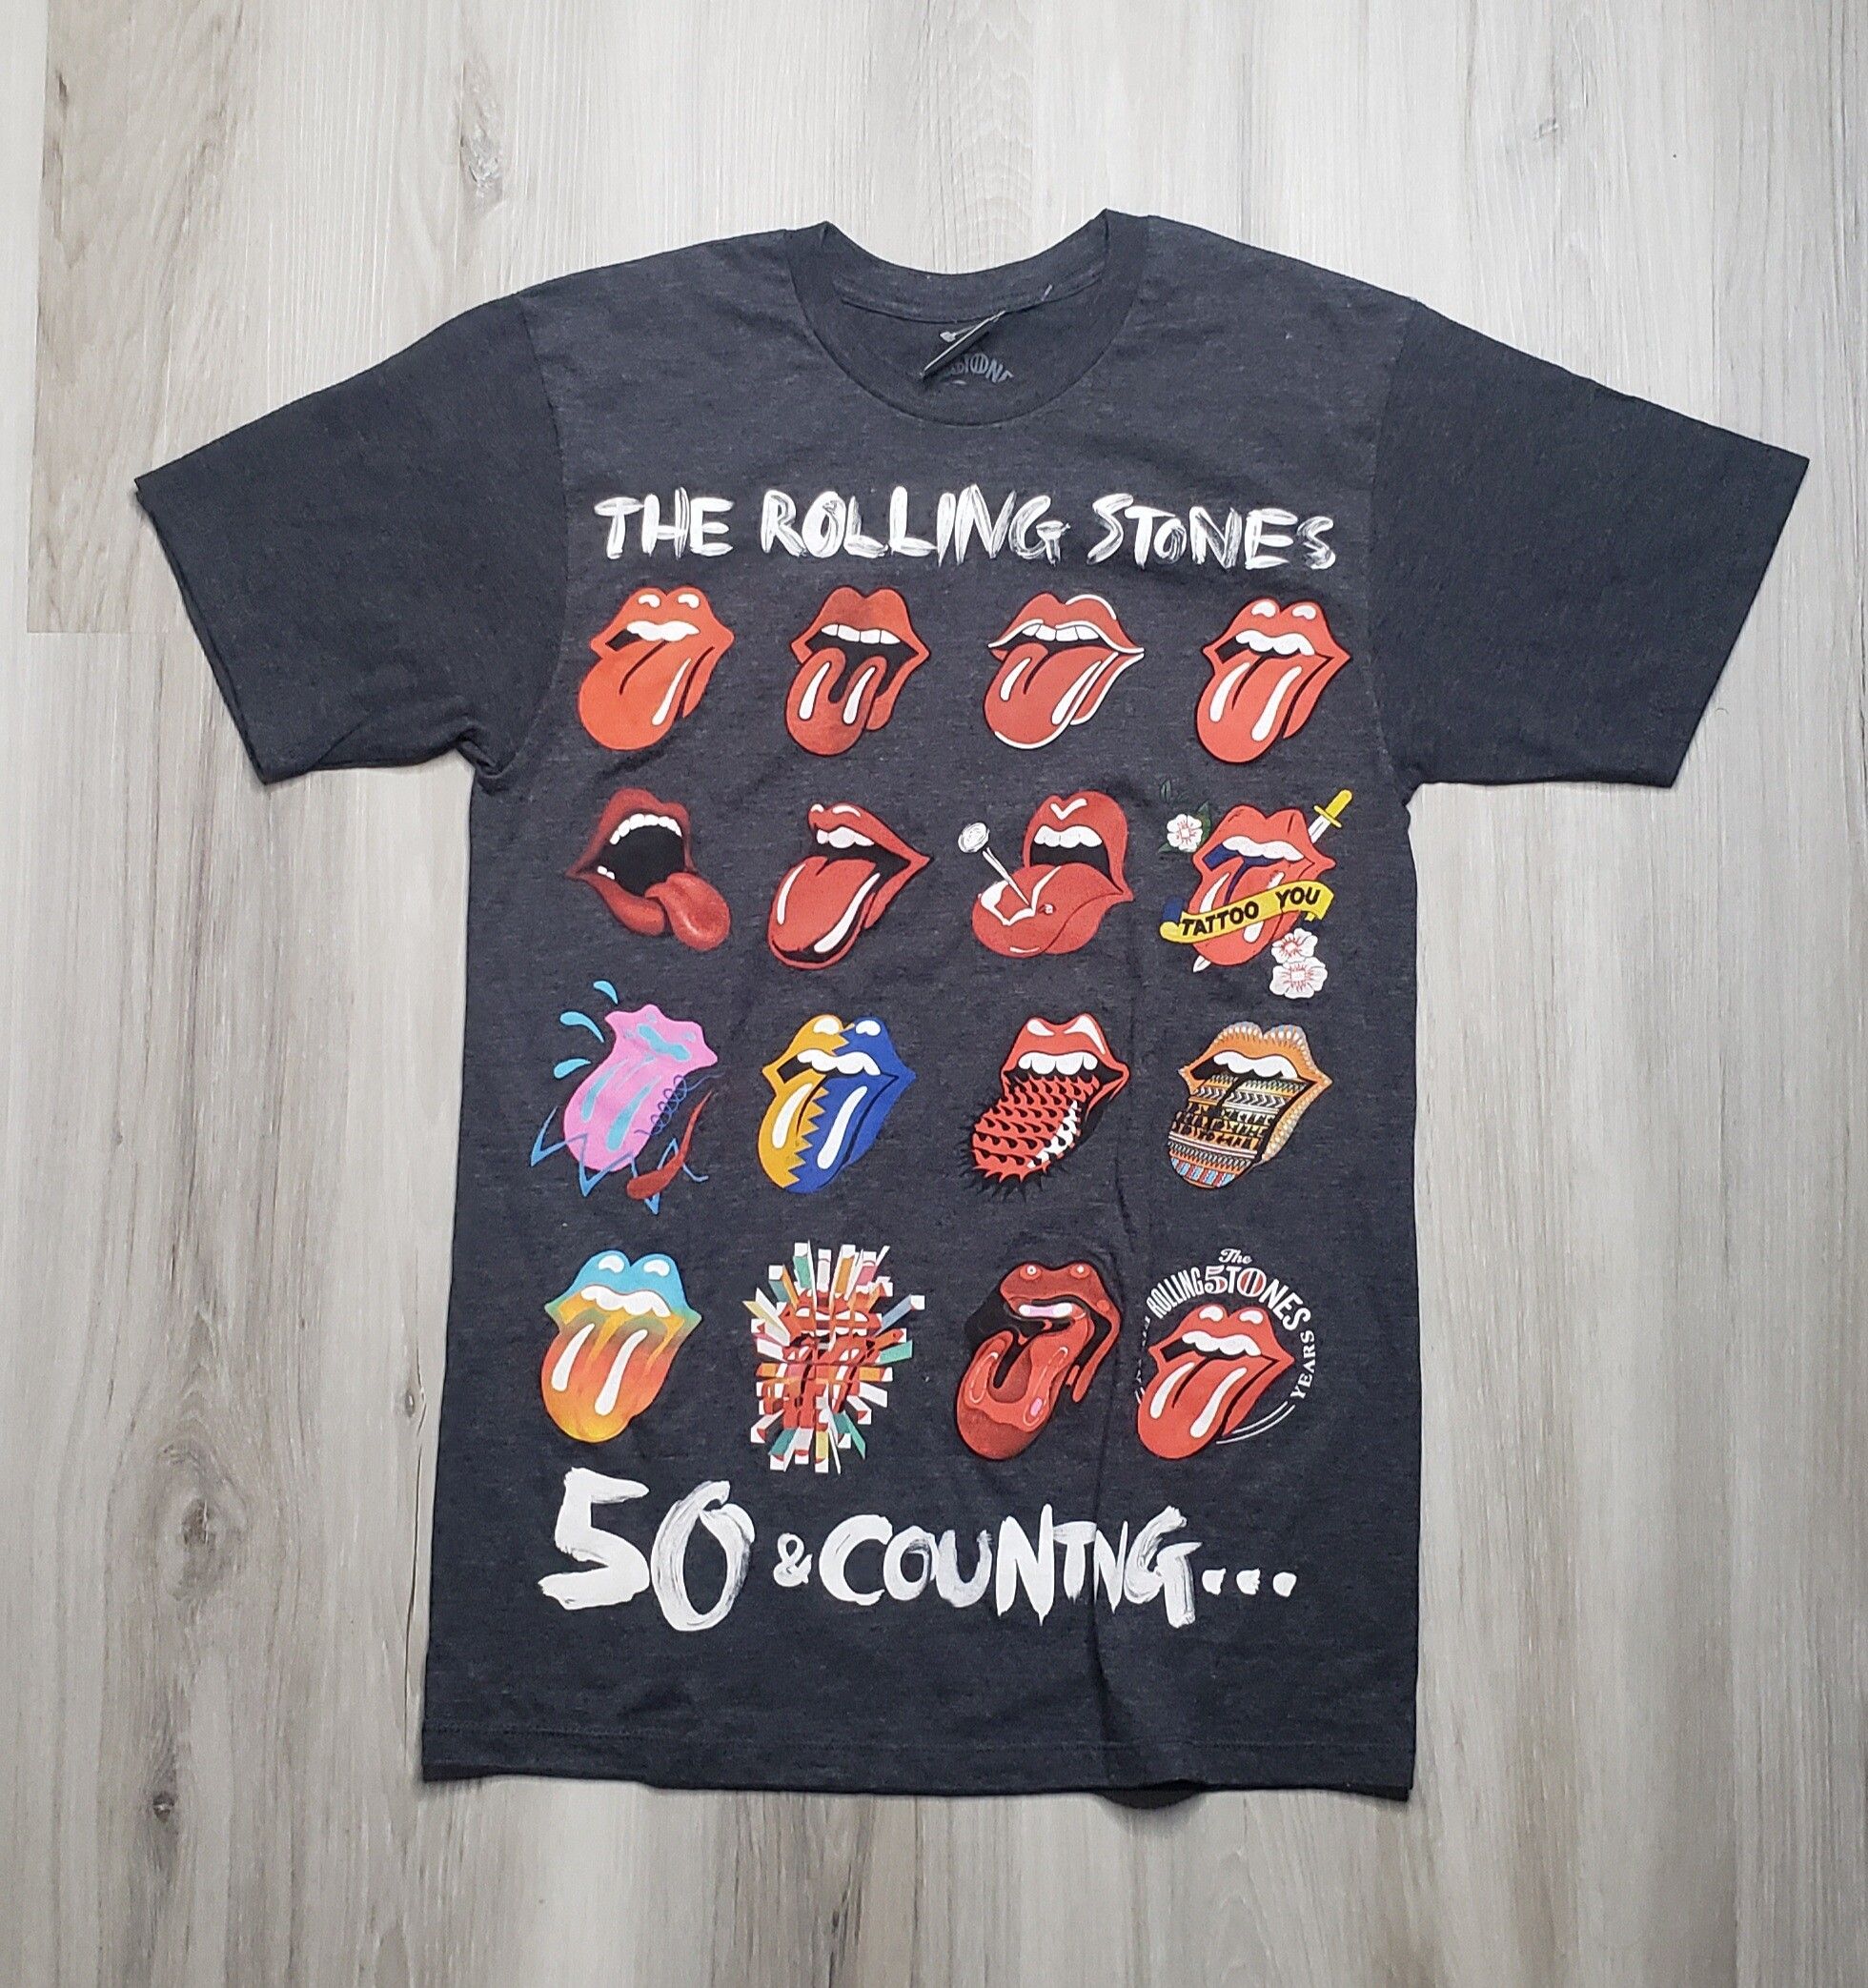 The Rolling Stones 50 & Counting The Rolling Stones T-Shirt Size US S / EU 44-46 / 1 - 1 Preview